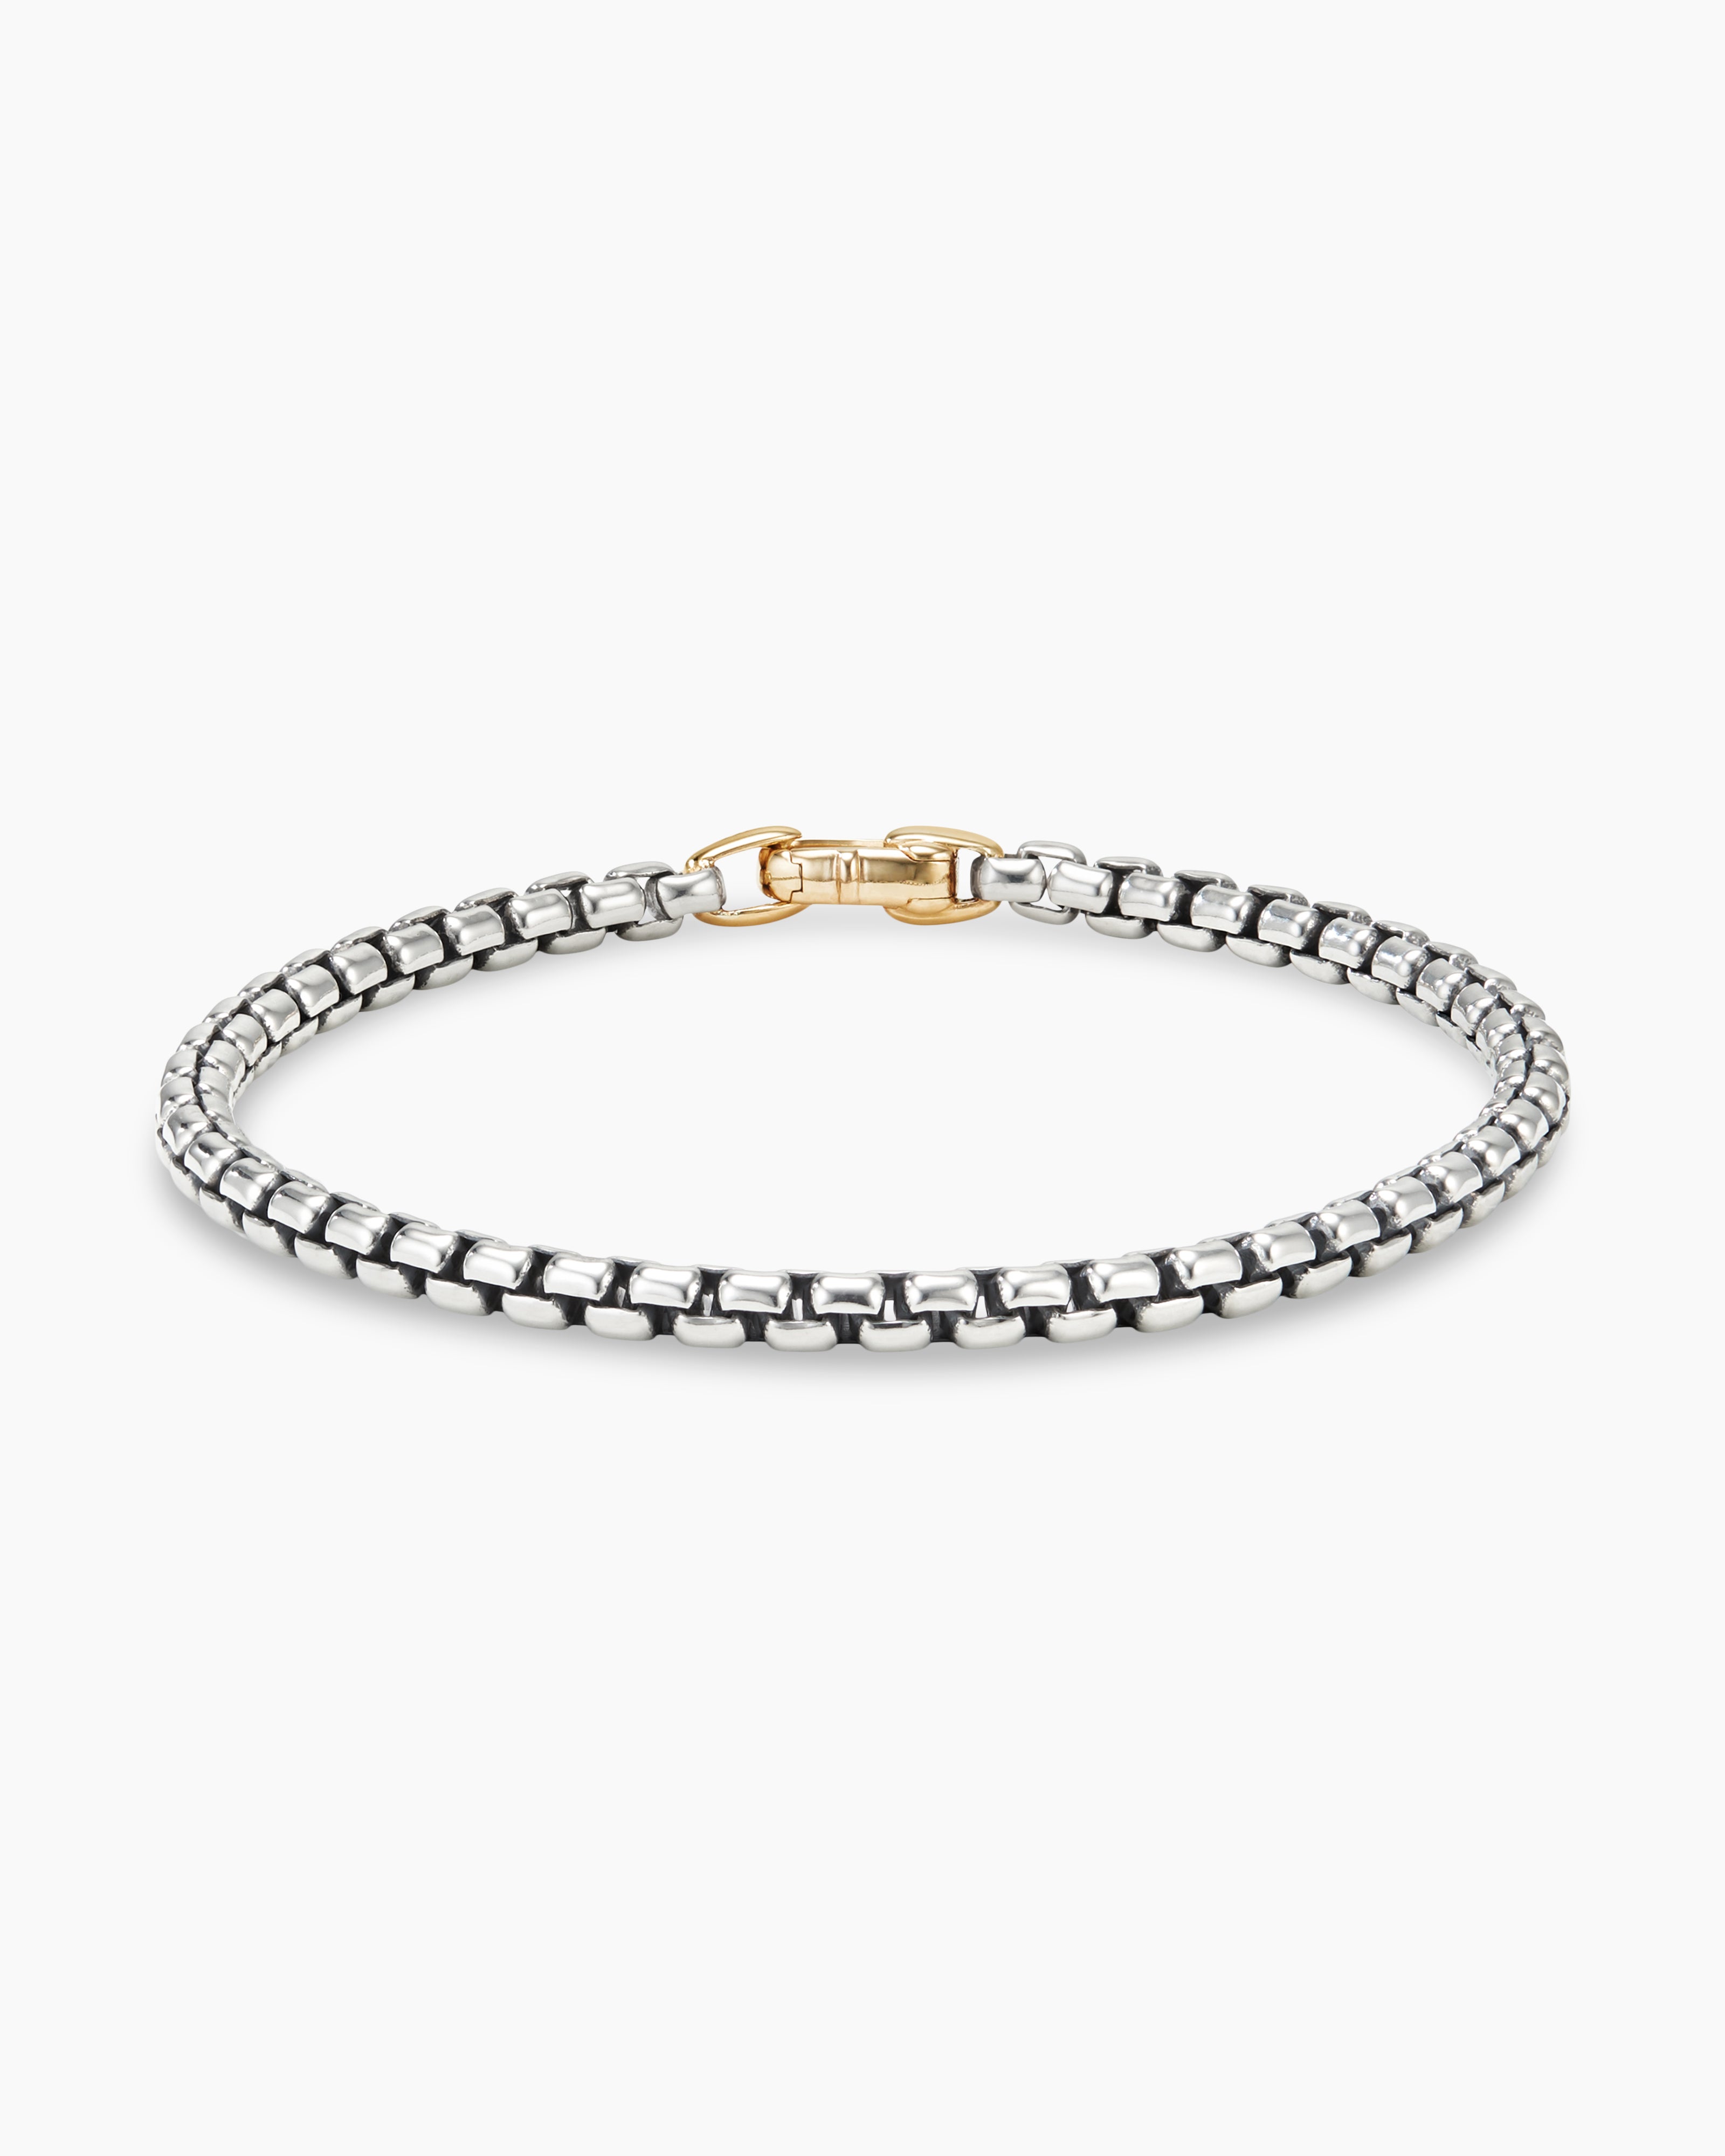 DY Madison Chain Bracelet in Sterling Silver with 18K Yellow Gold